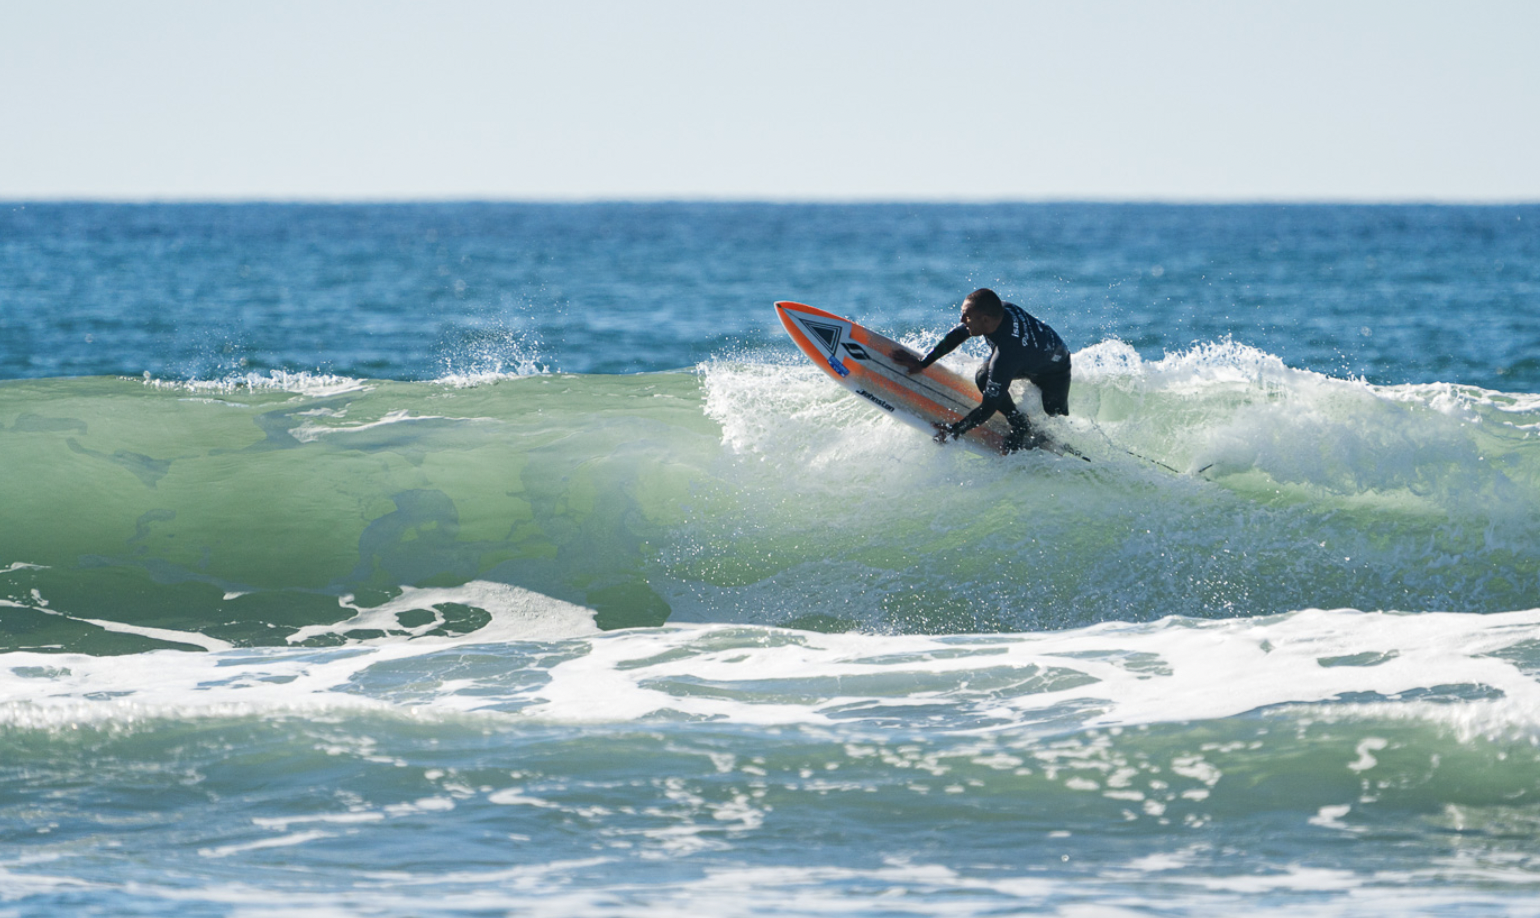 The event at Pismo Beach came to a dramatic close ©ISA/Ben Reed